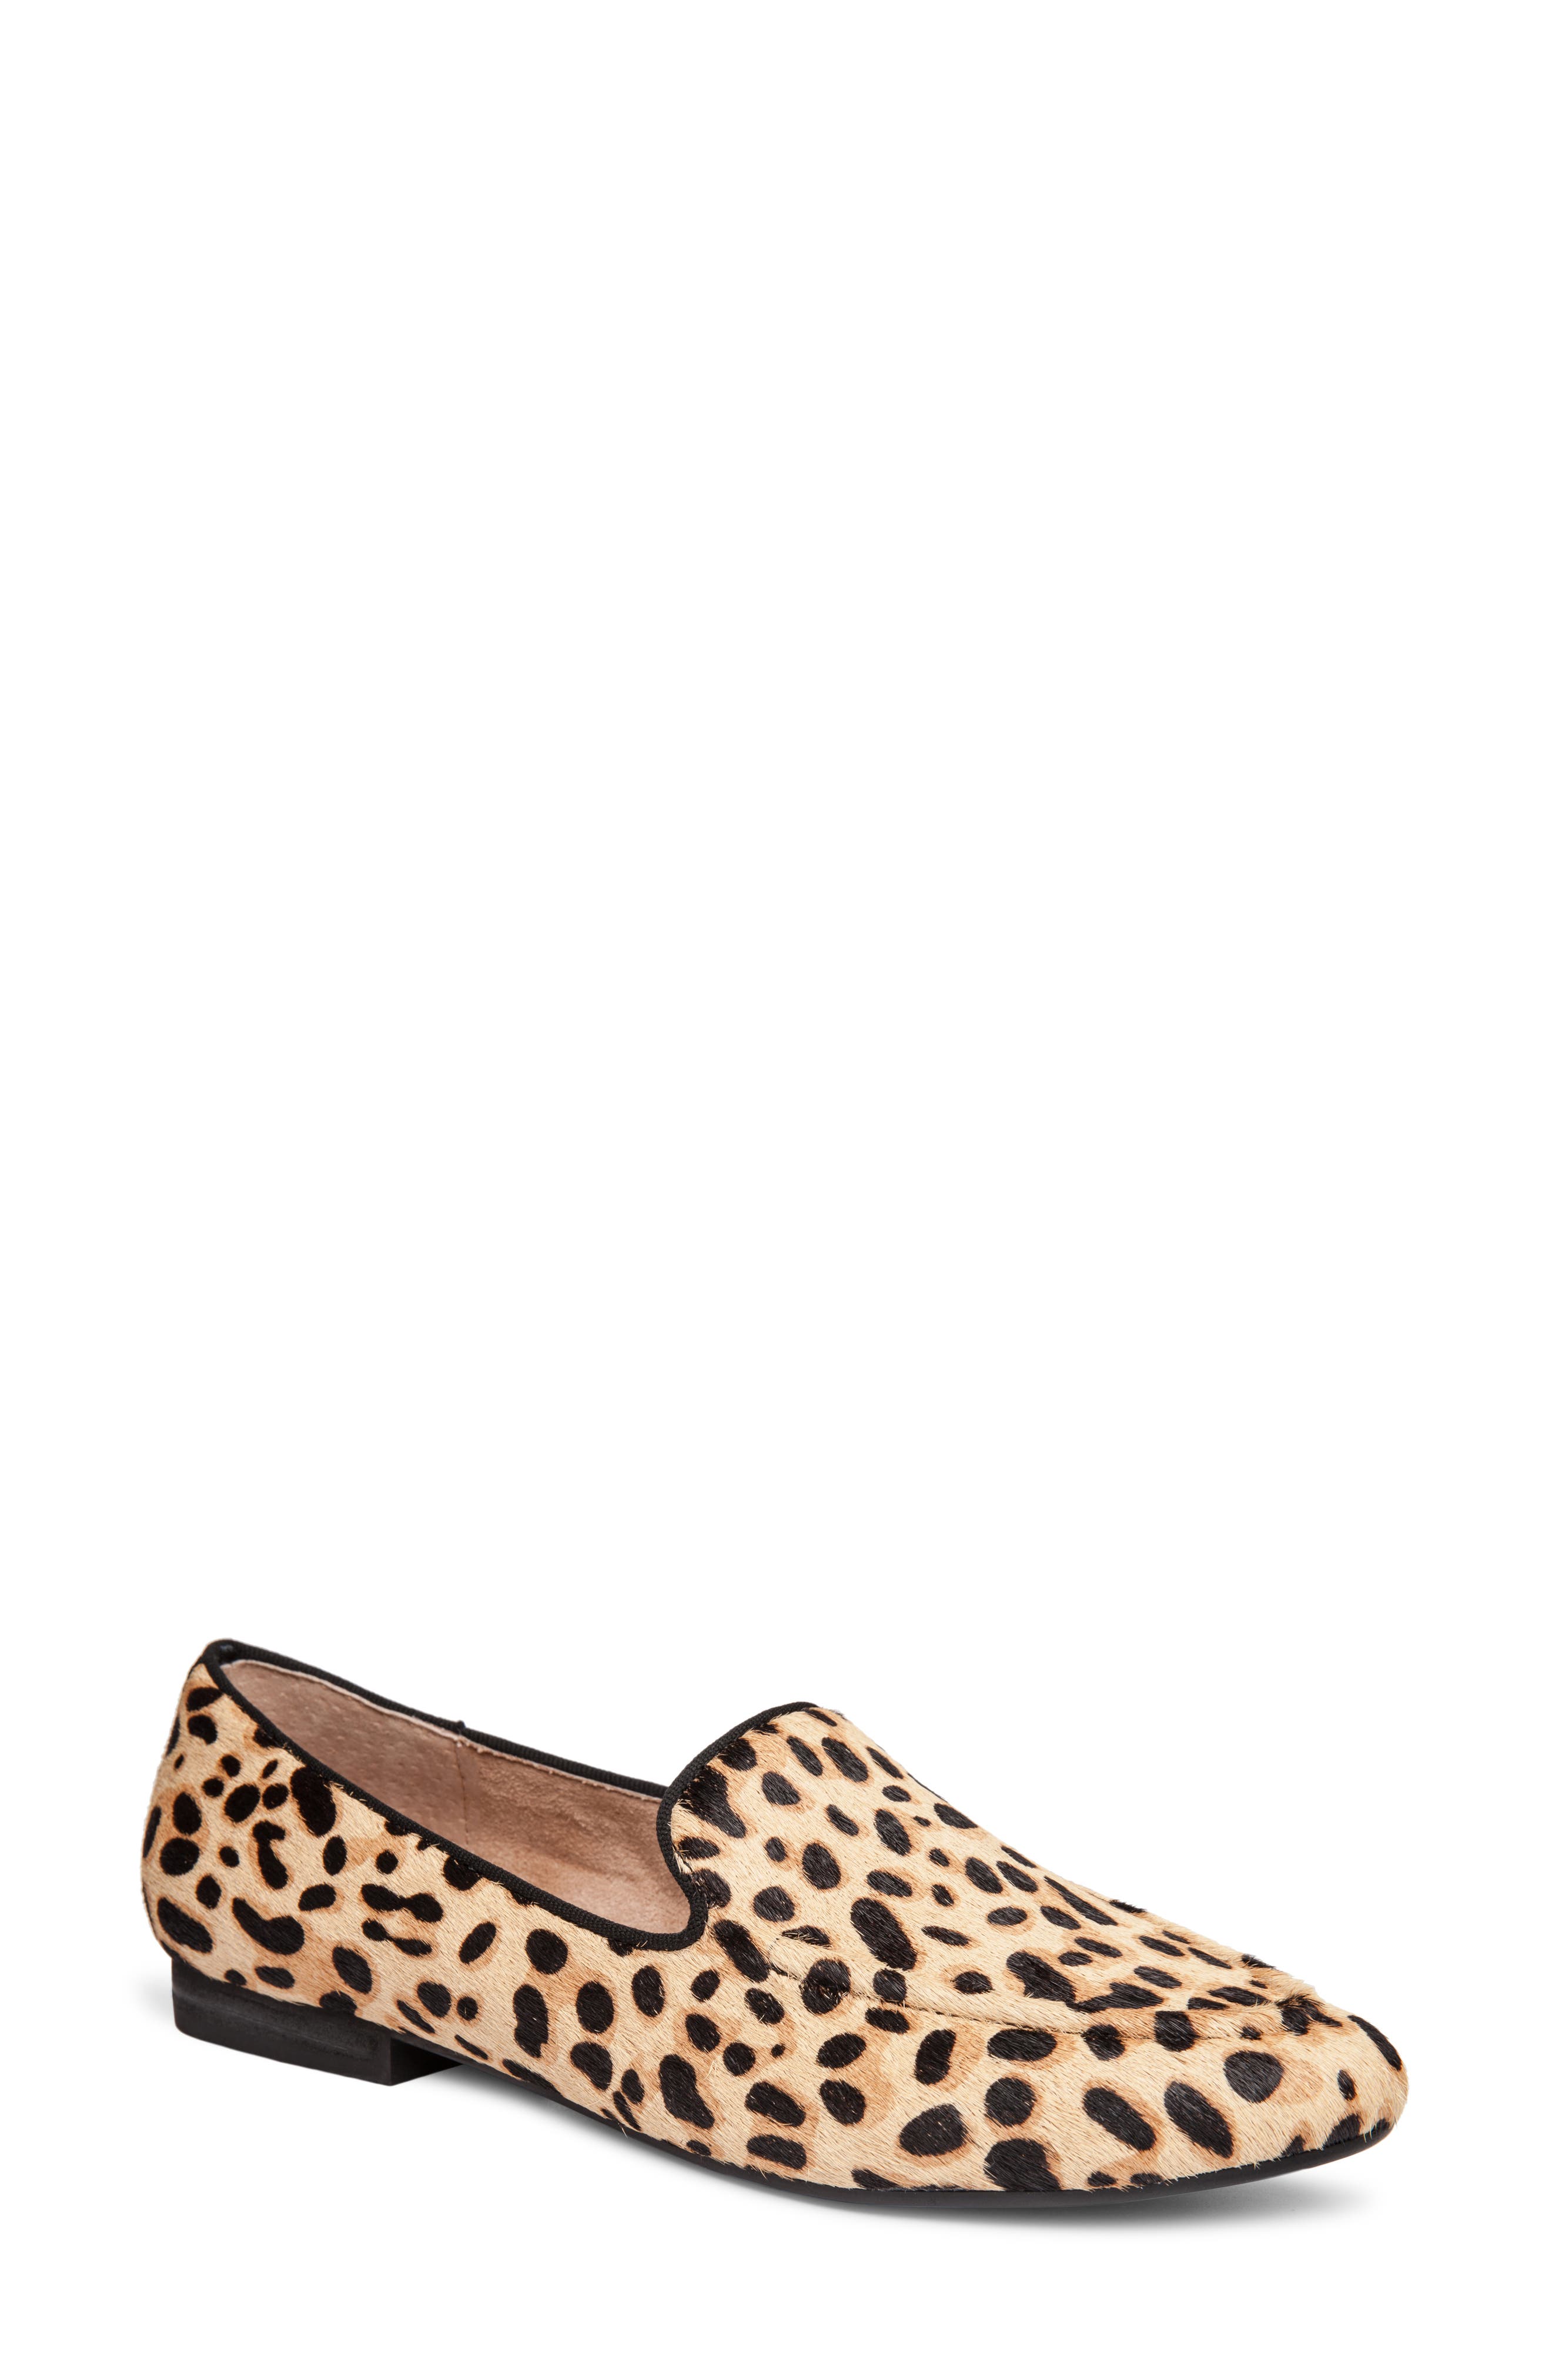 Women's Me Too Shoes | Nordstrom